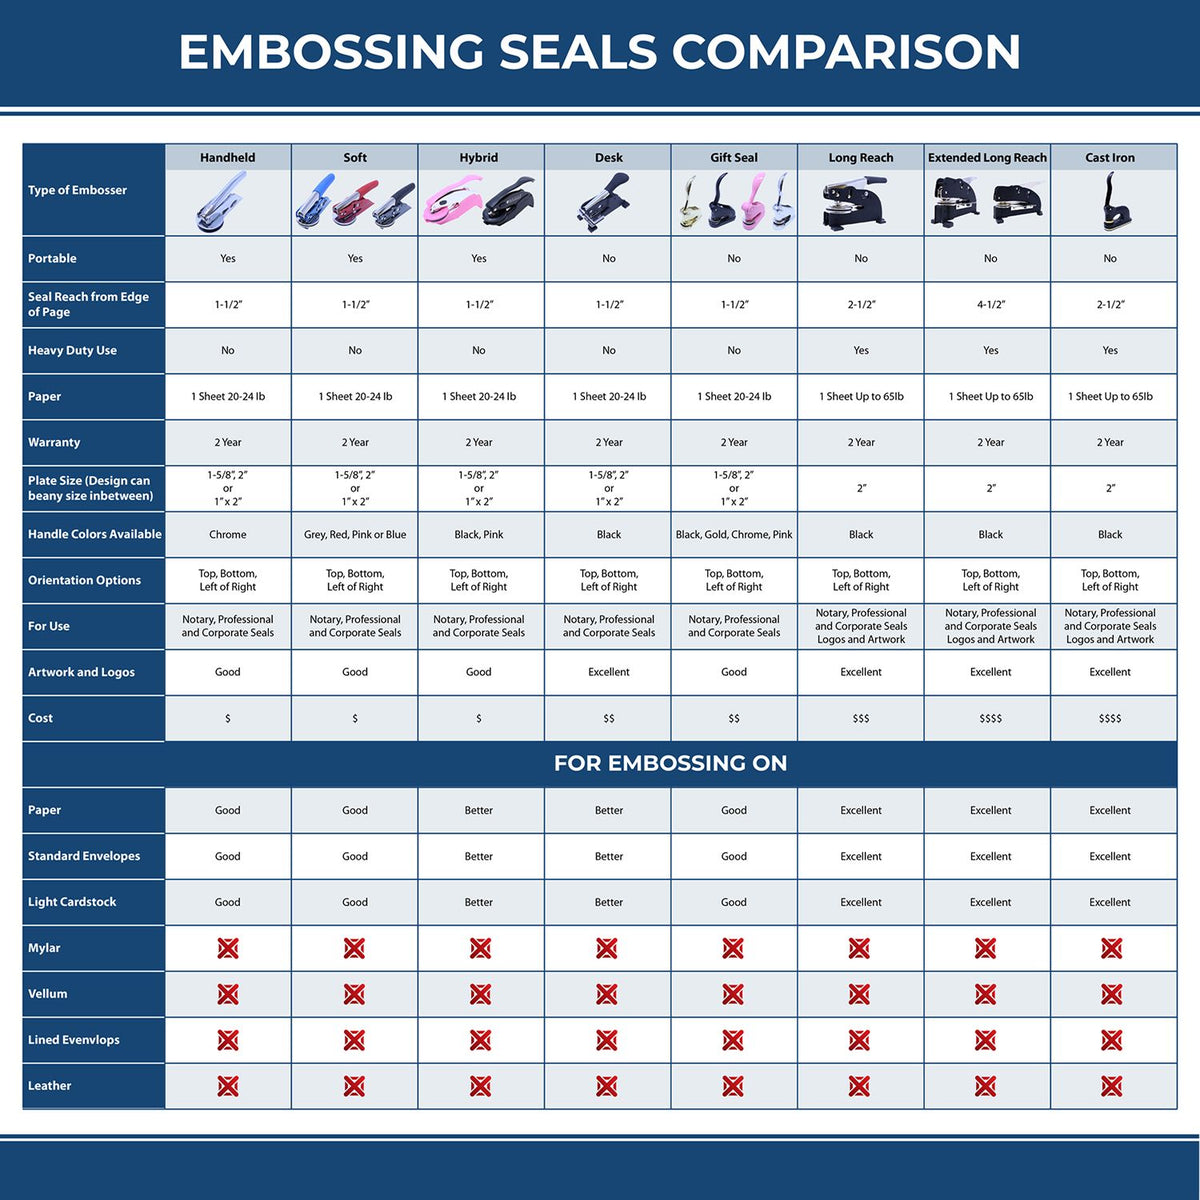 A comparison chart for the different types of mount models available for the State of Alabama Soft Land Surveyor Embossing Seal.